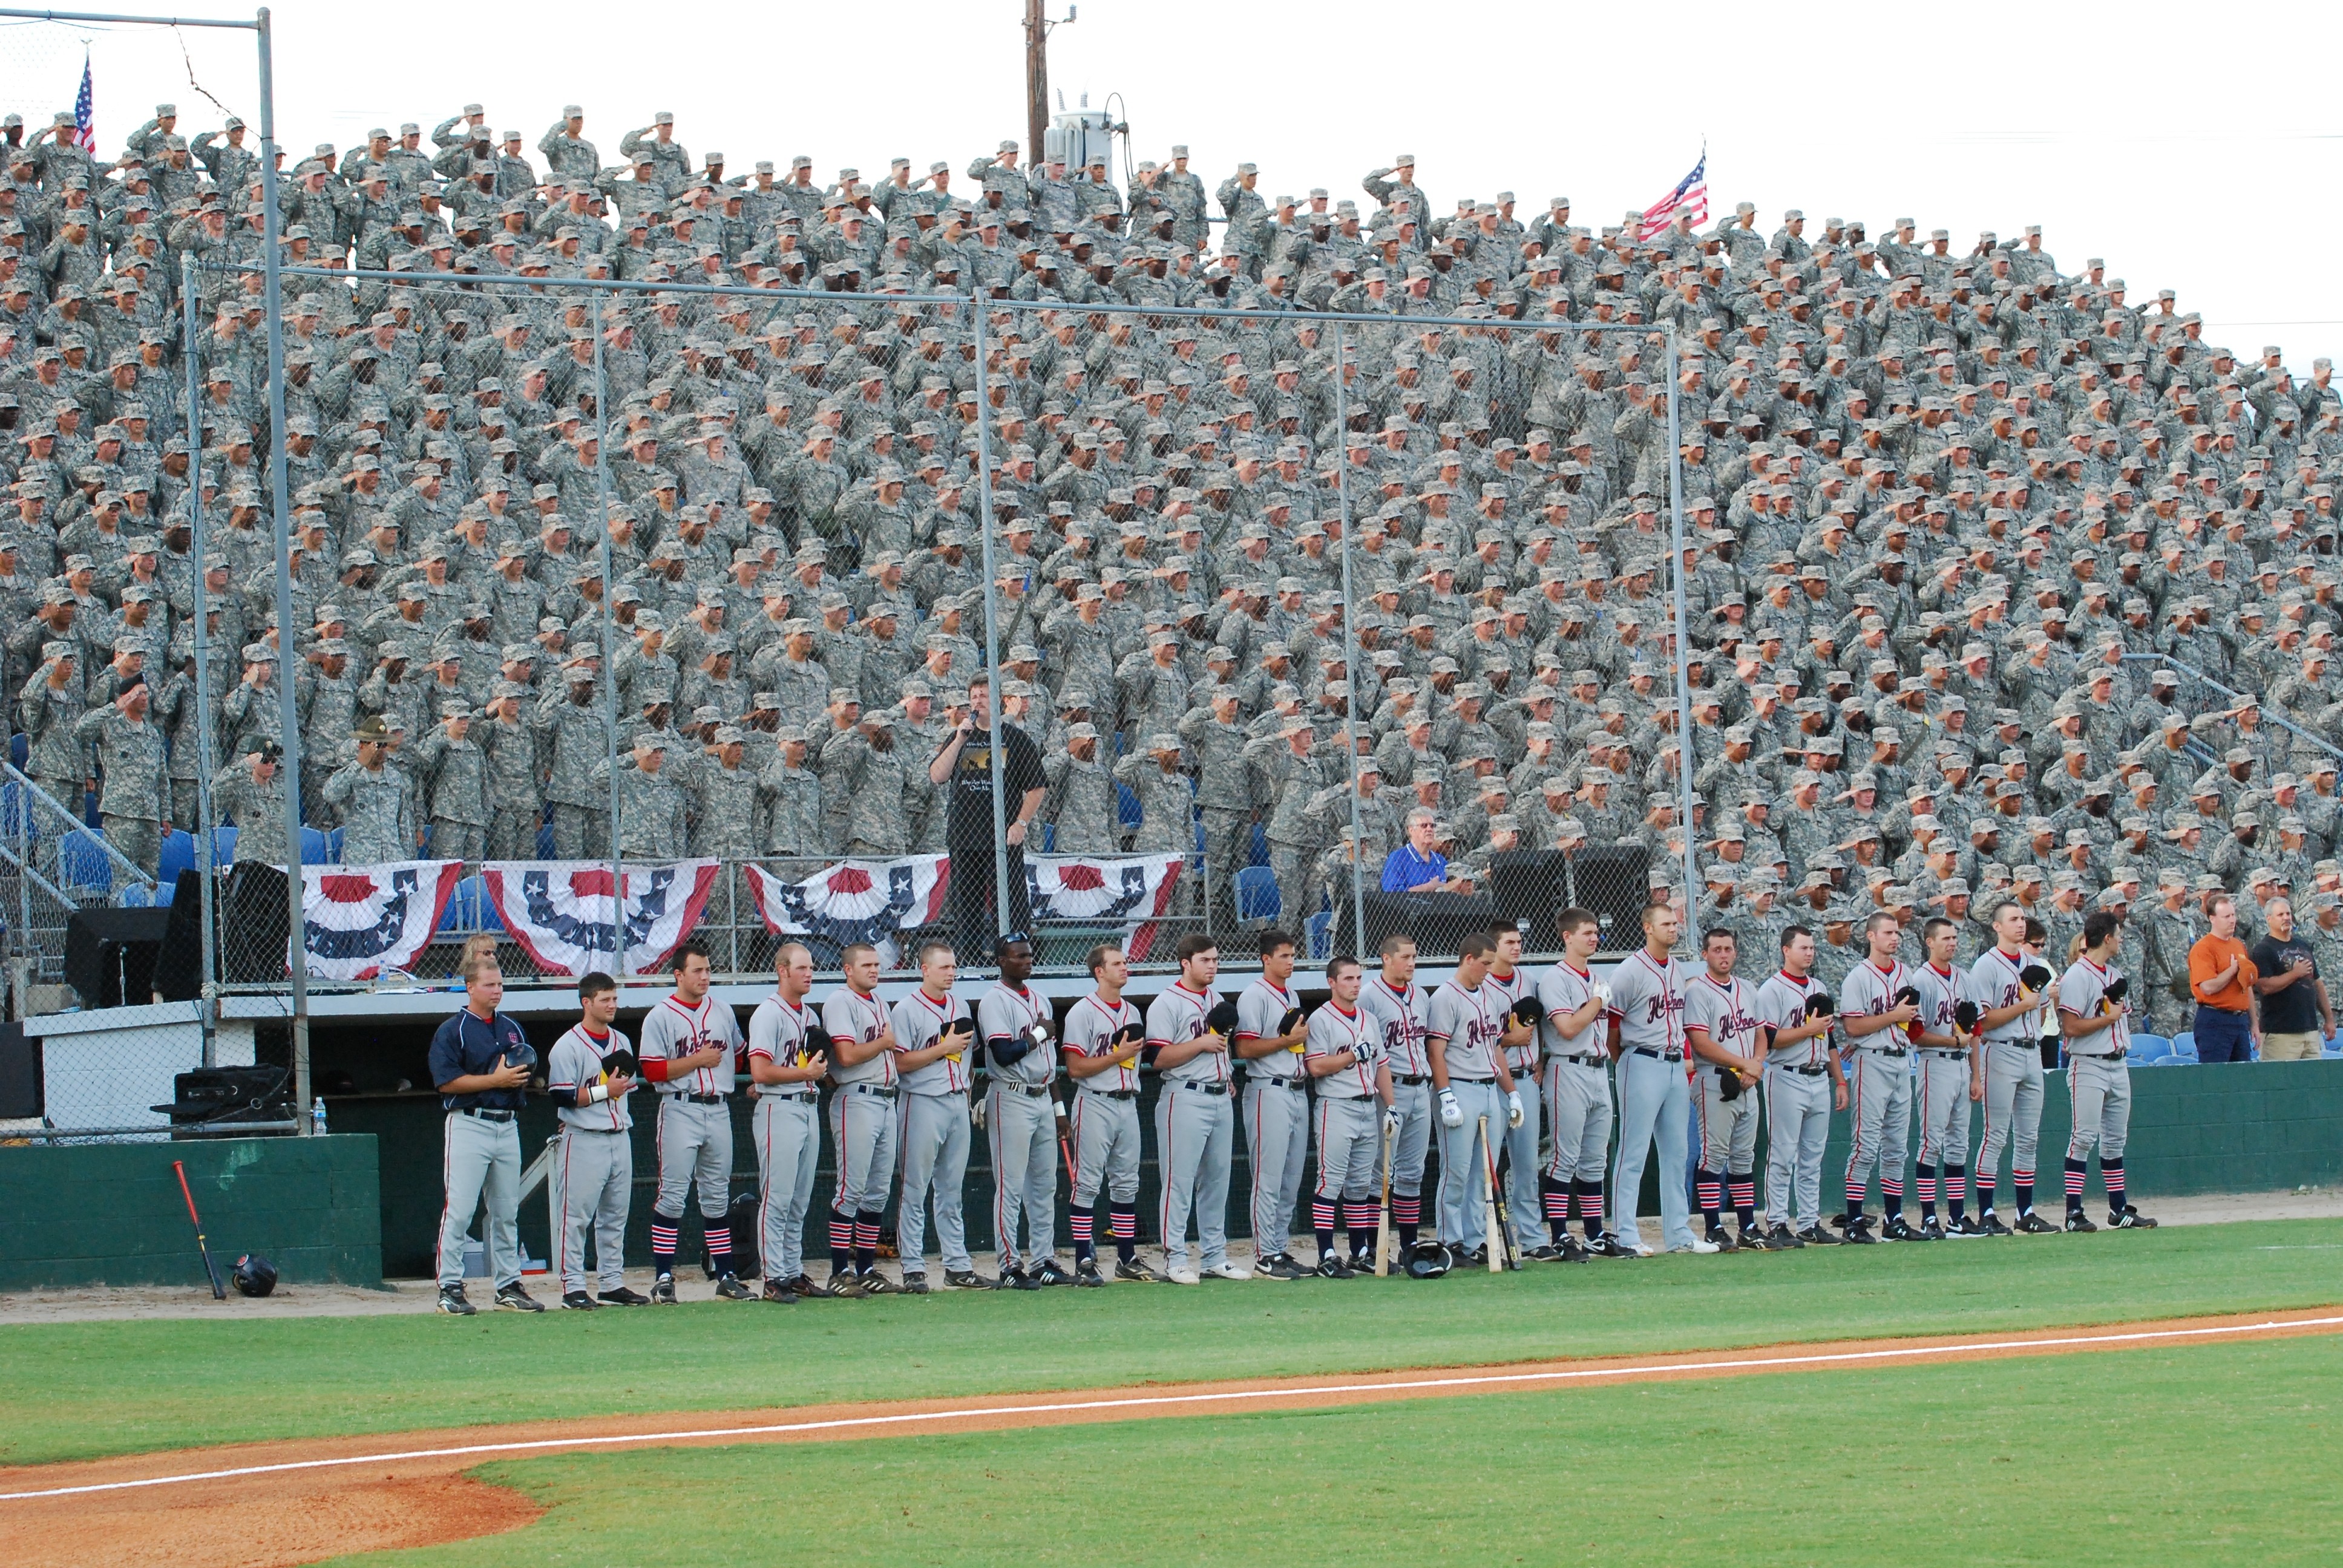 Blowfish to host free baseball game for Soldiers Article The United States Army